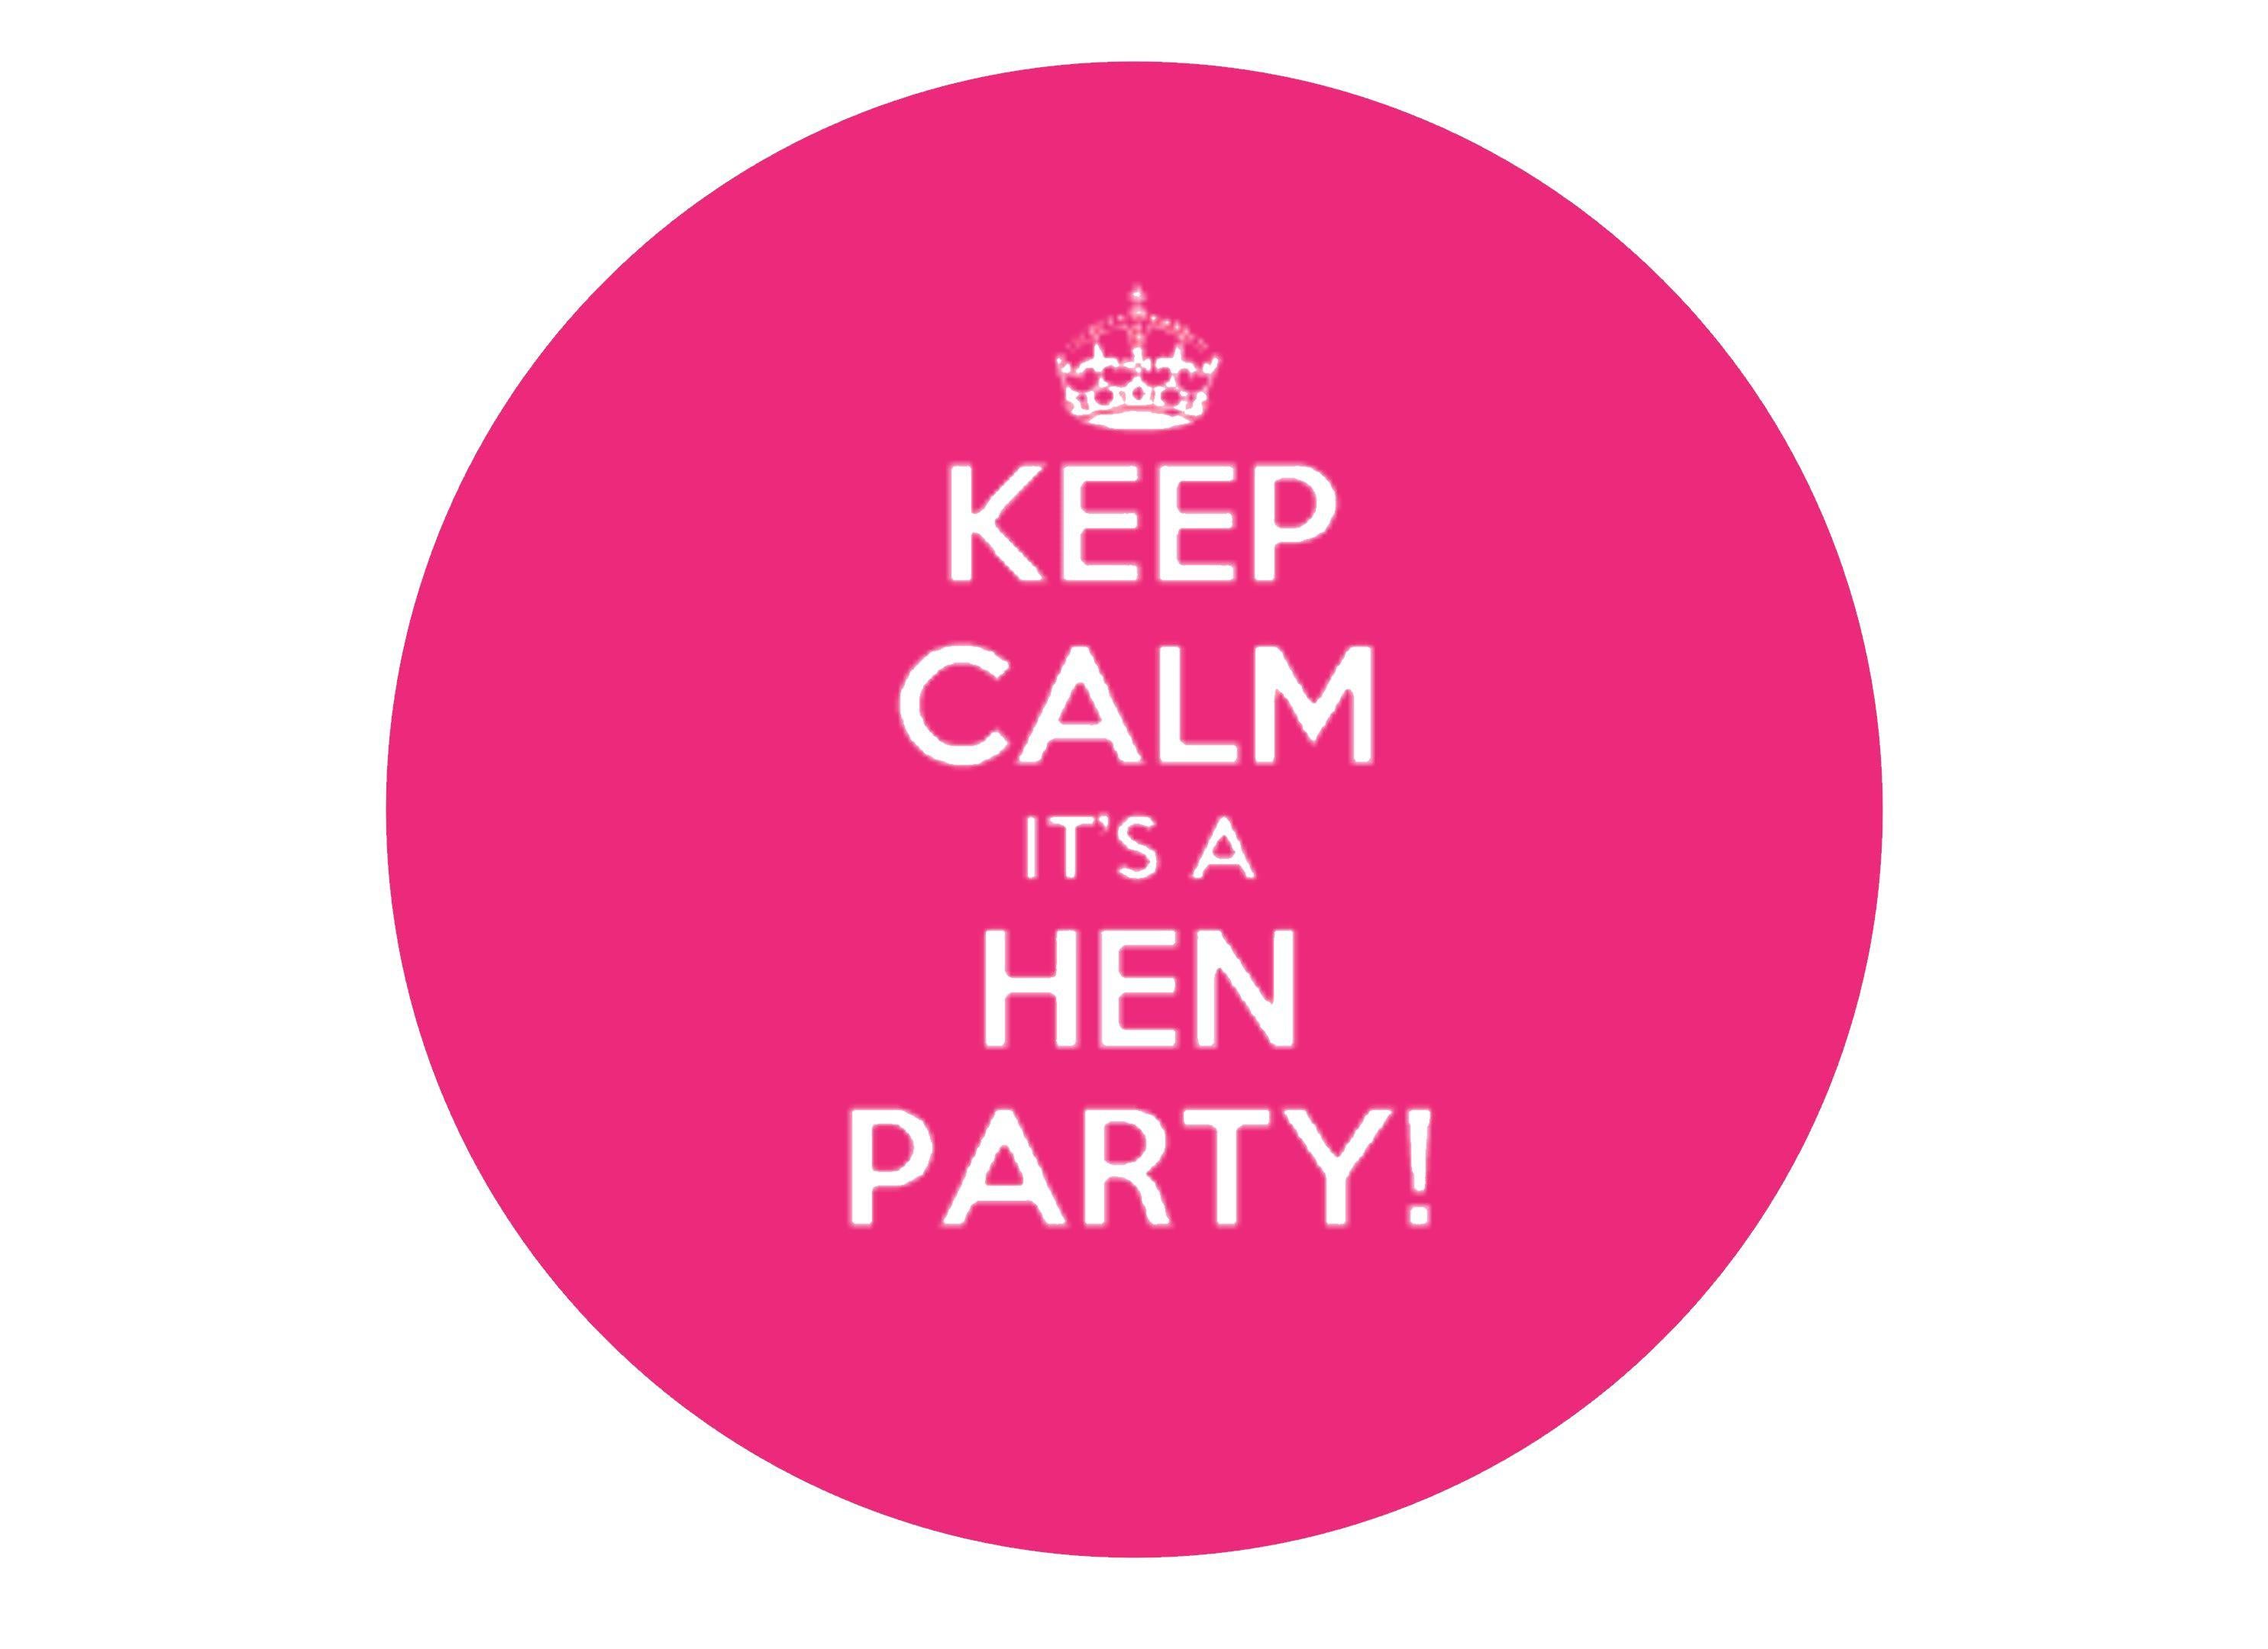 190mm printed edible cake topper for a hen party